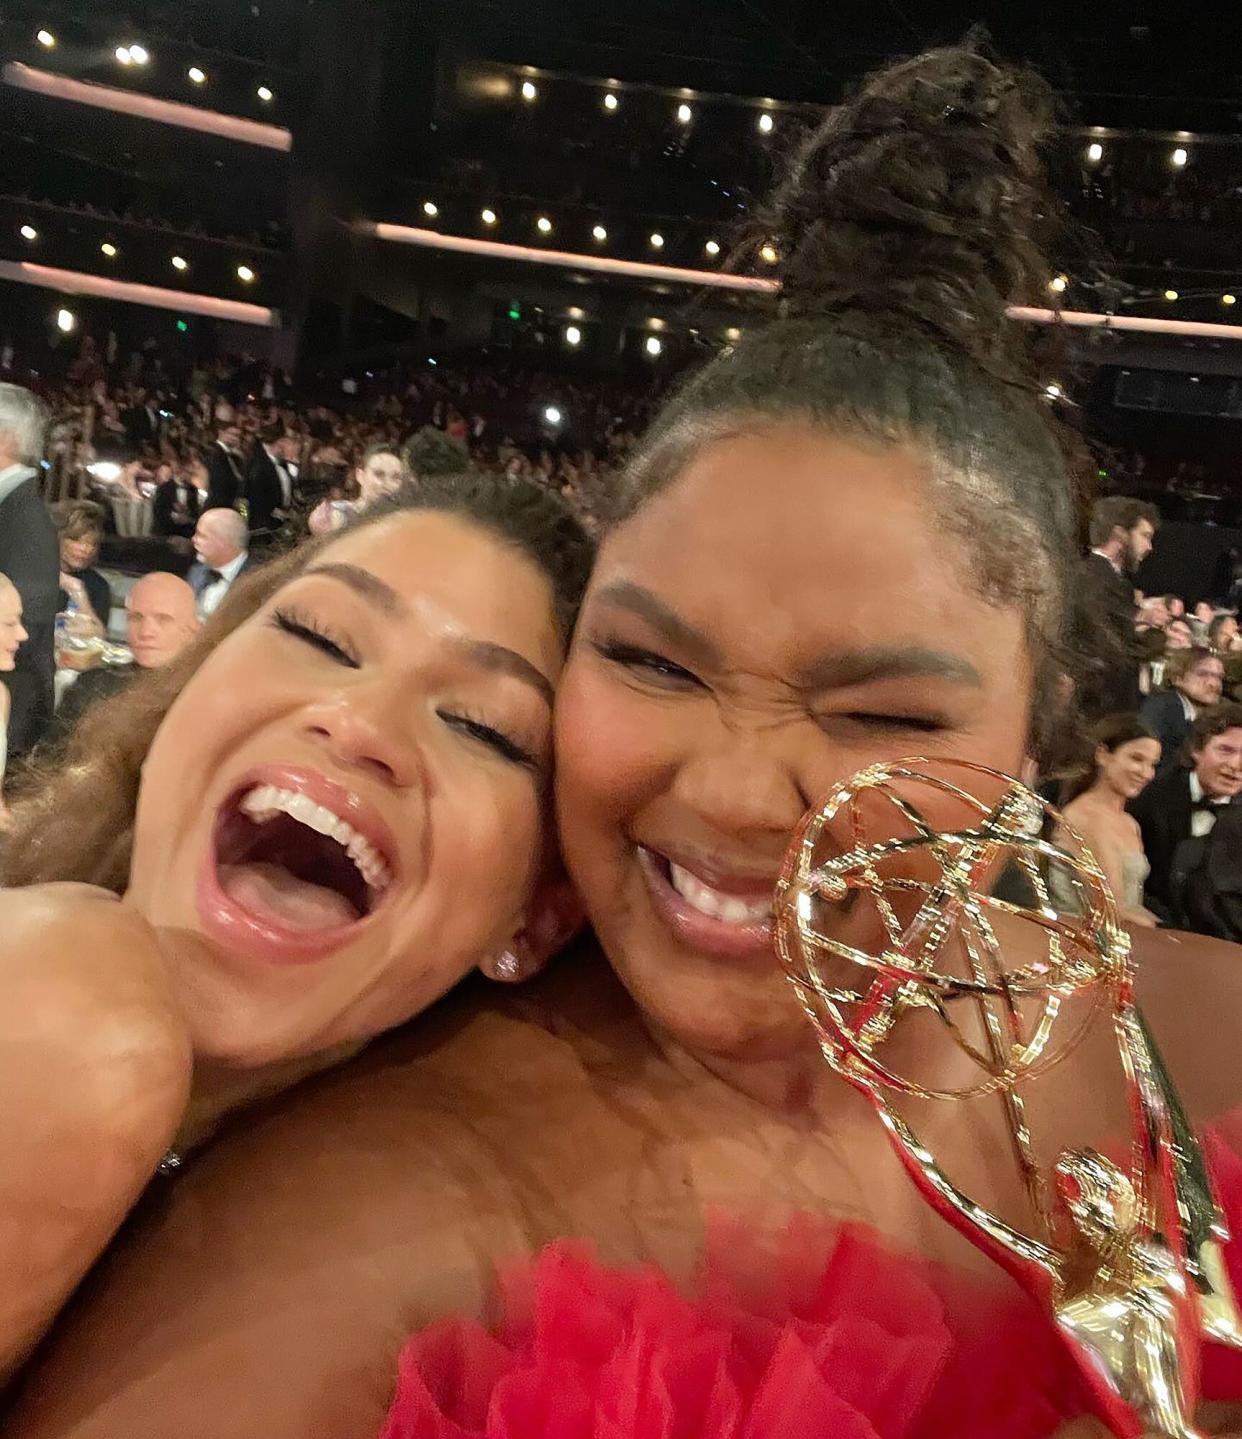 https://www.instagram.com/p/Cic5jh5LgGr/. Lizzo Shares 'Selfie Time' From the Emmys